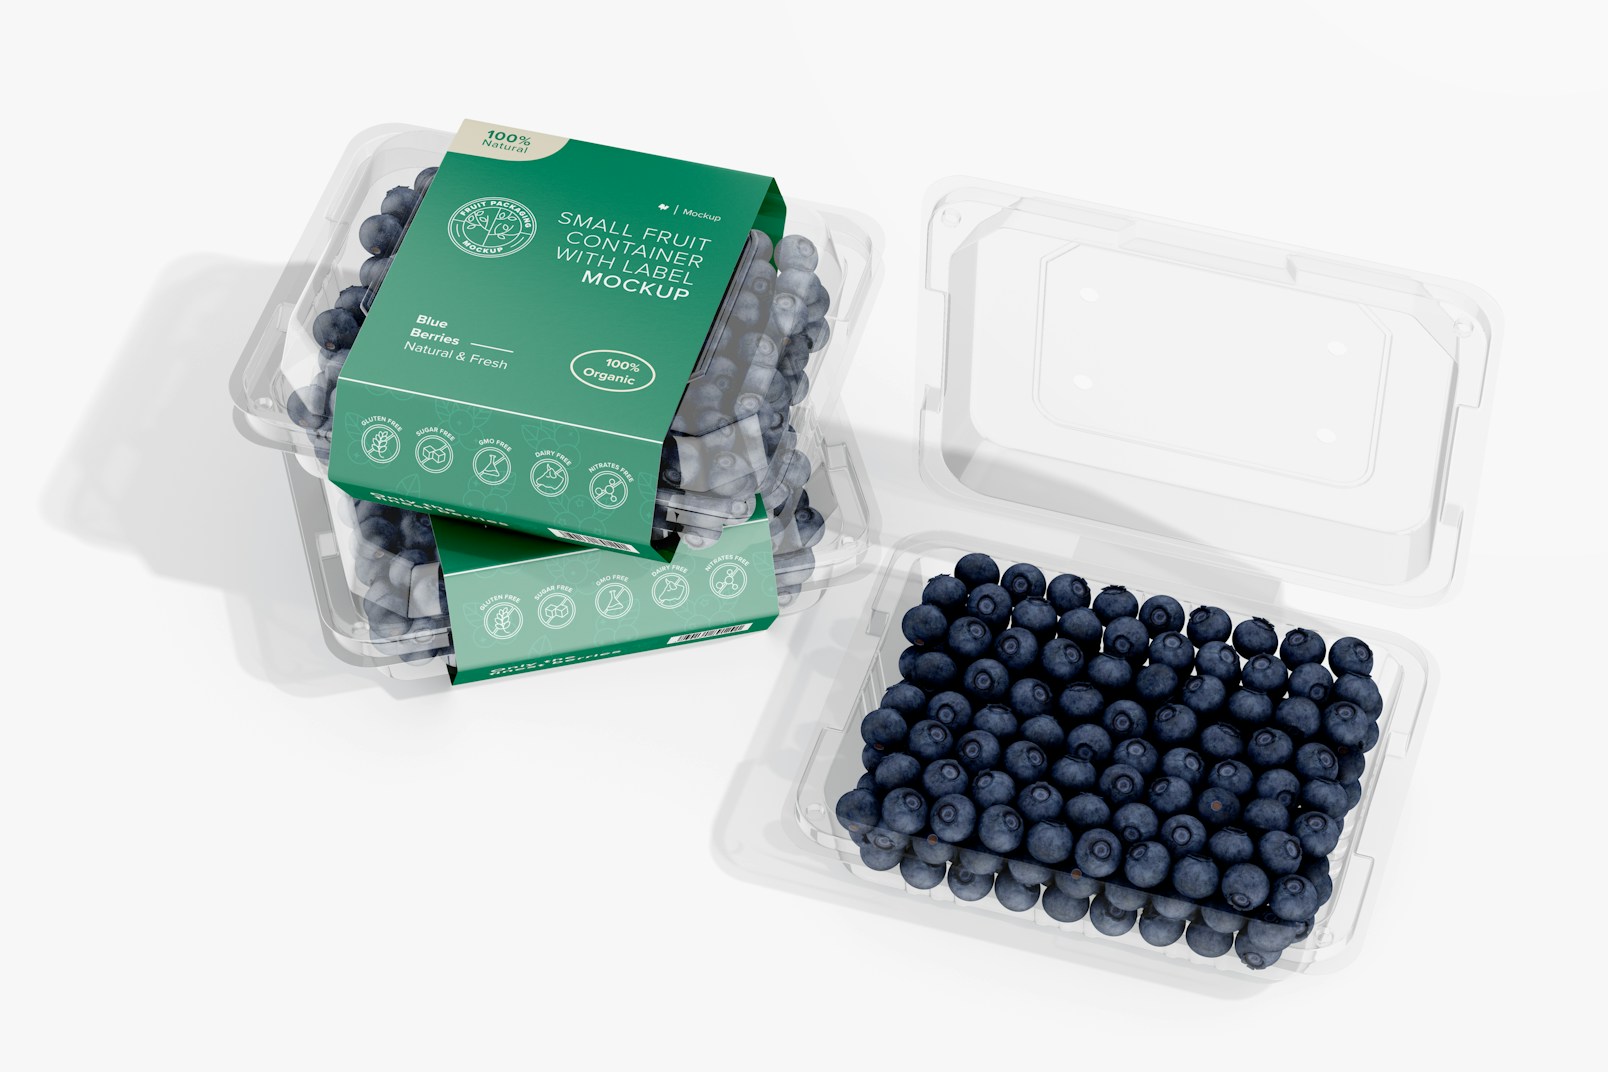 Small Fruit Containers with Label Mockup, Opened